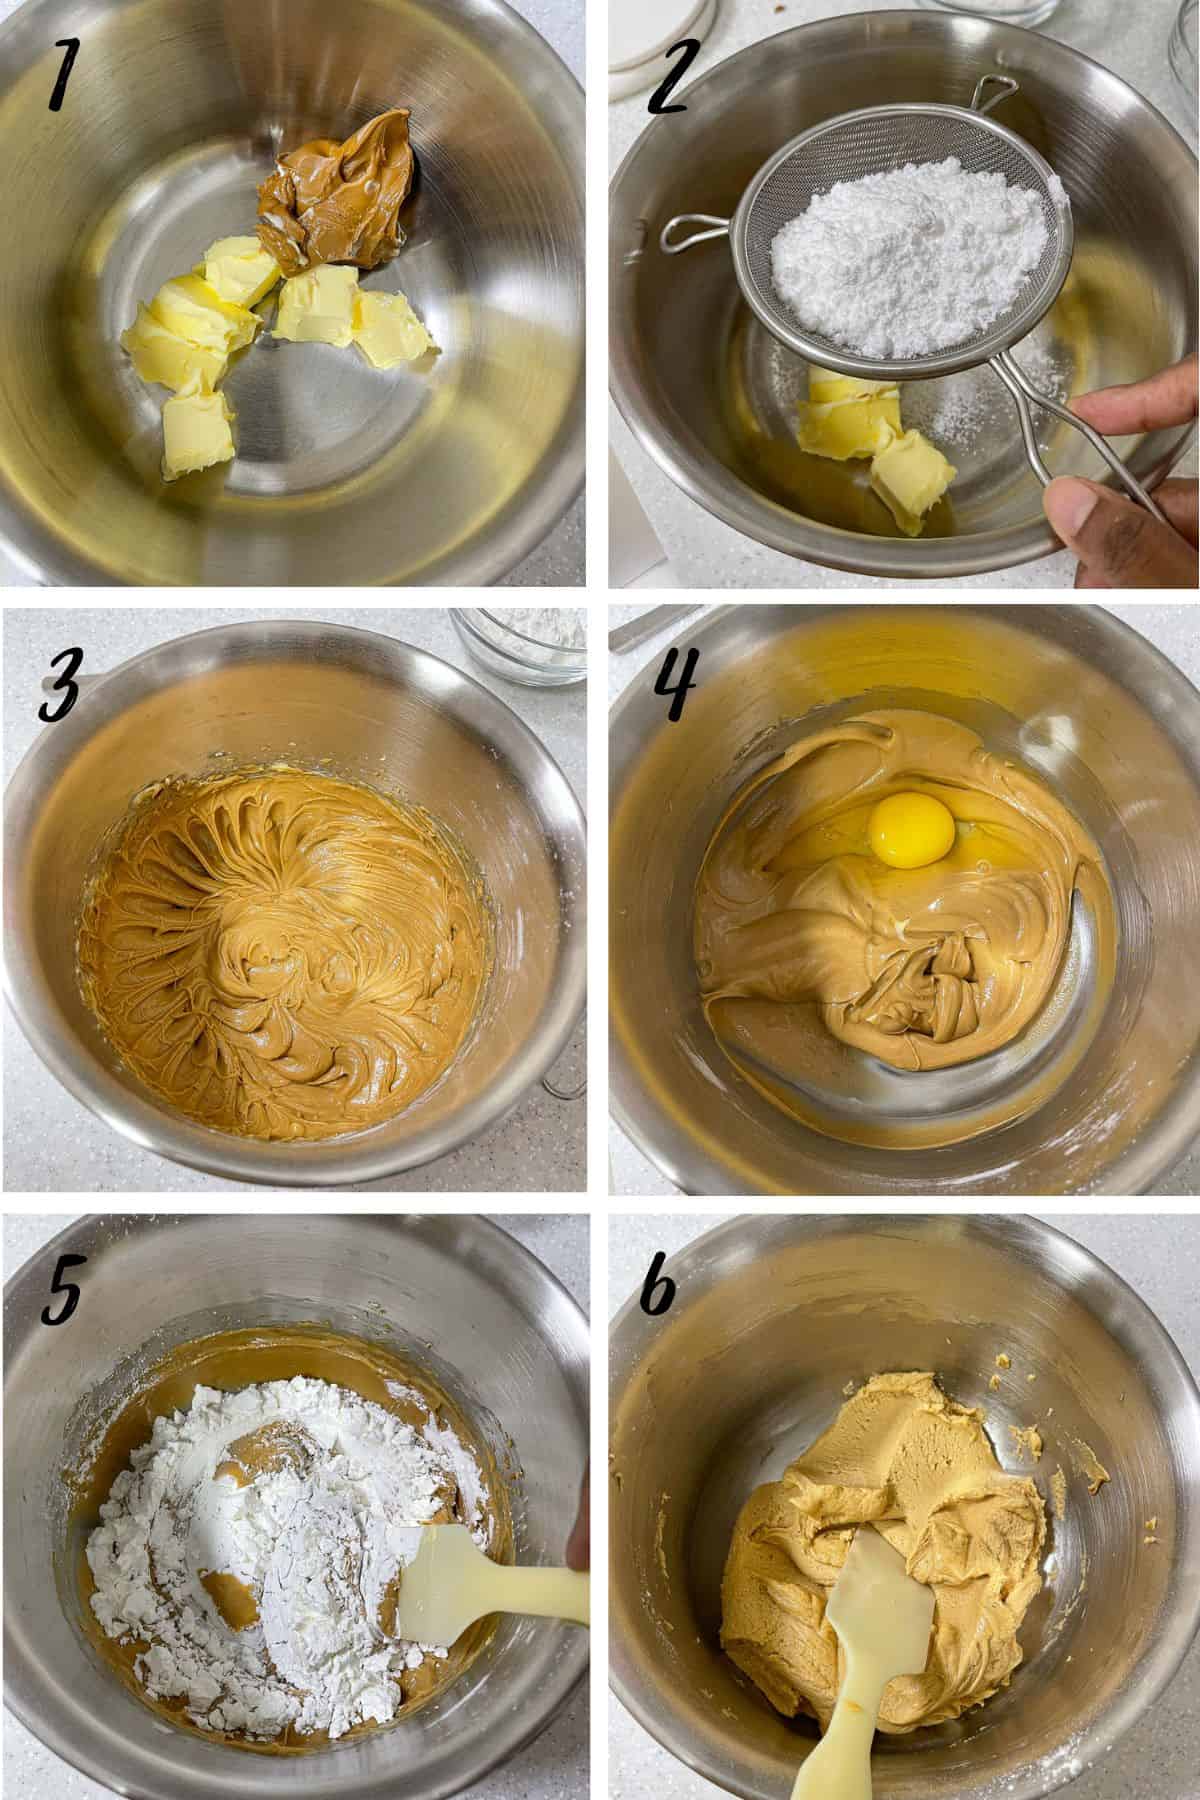 A poster of 6 images showing how to mix cookie dough.